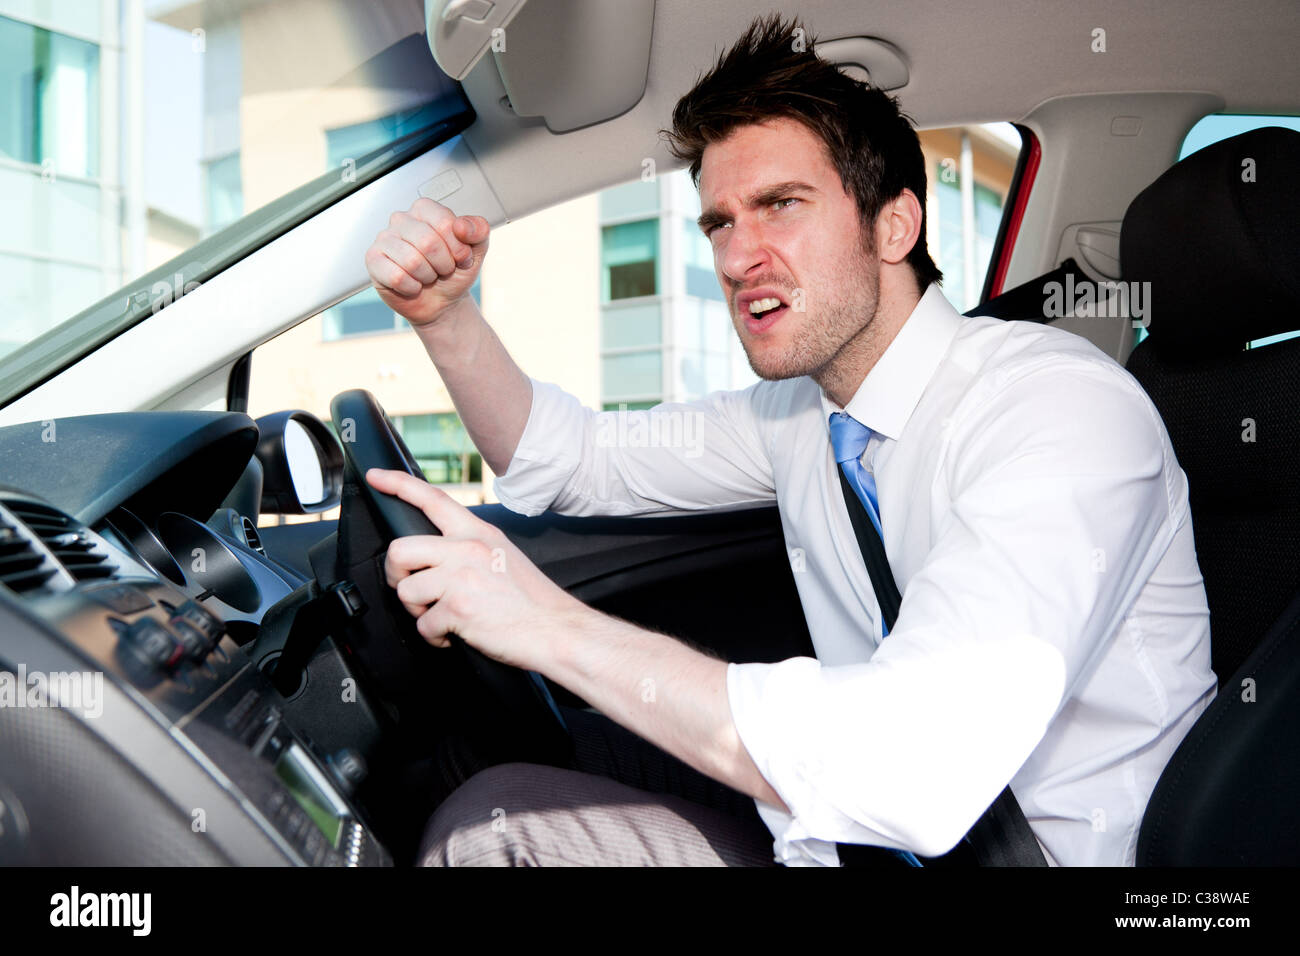 Man gesturing whilst driving car Stock Photo